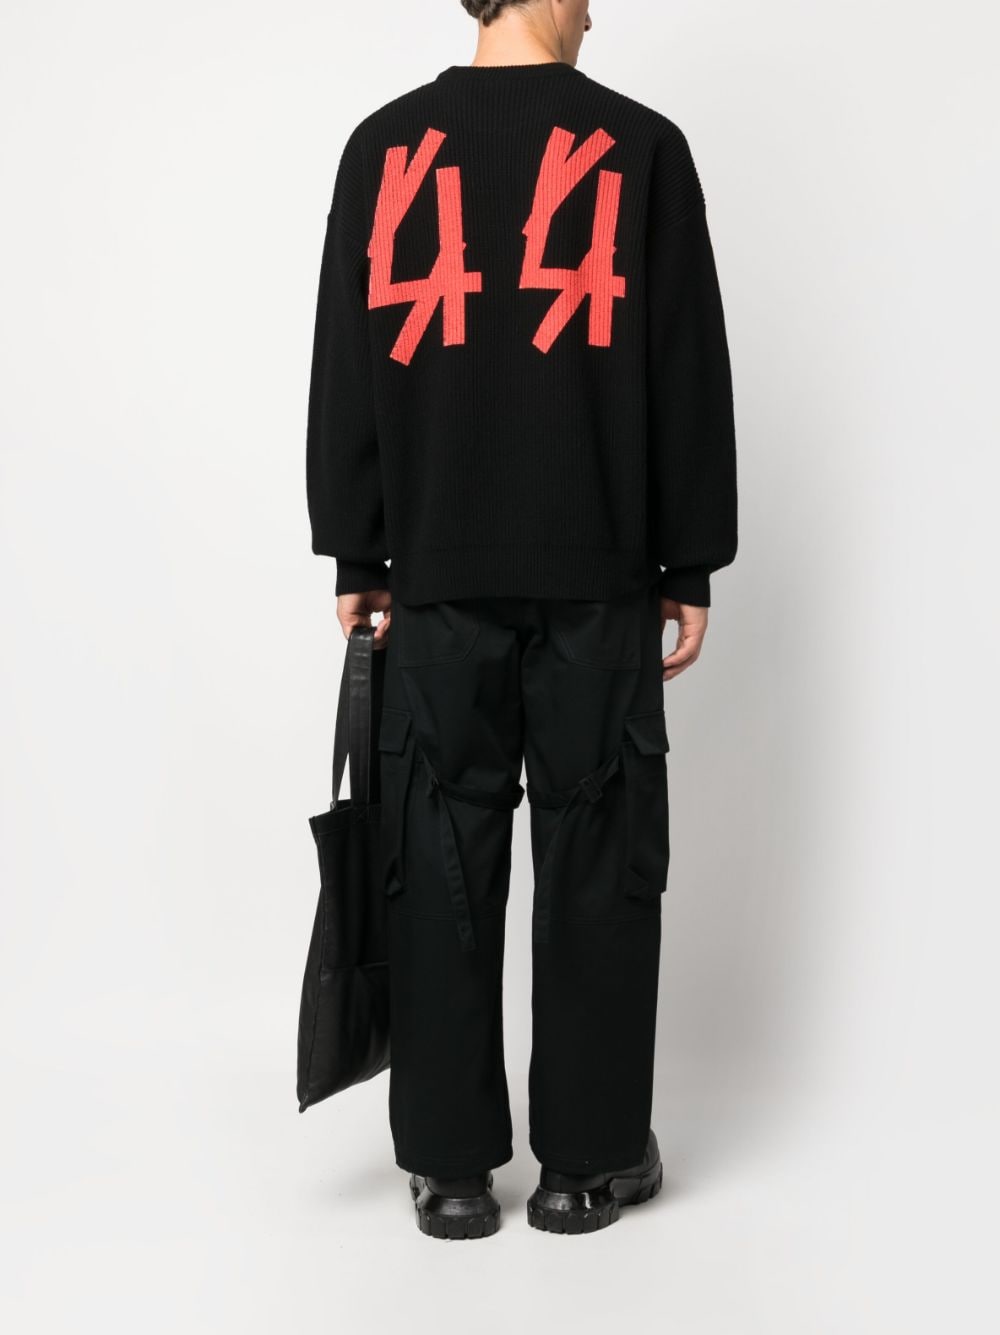 black sweater with red logo on the back